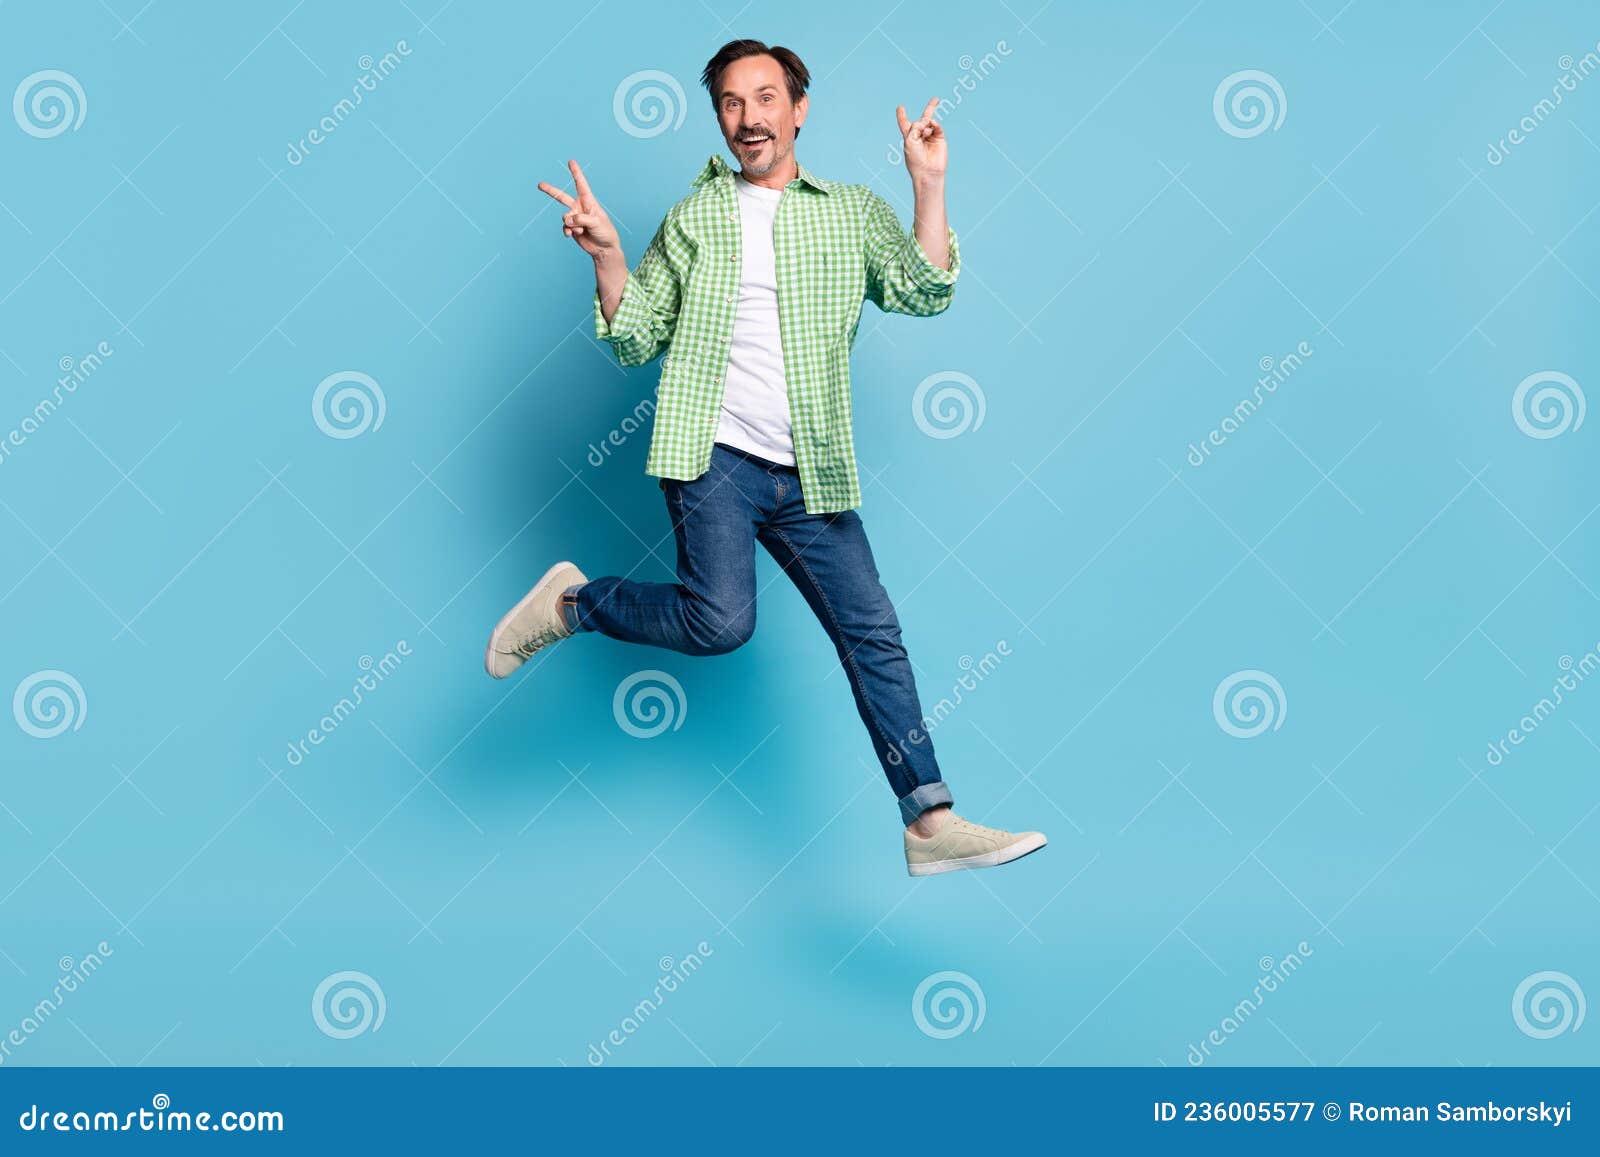 Full Length Body Size View of Attractive Cheery Lucky Funny Man Jumping  Showing V-sign Isolated Over Bright Blue Color Stock Image - Image of glad,  jump: 236005577